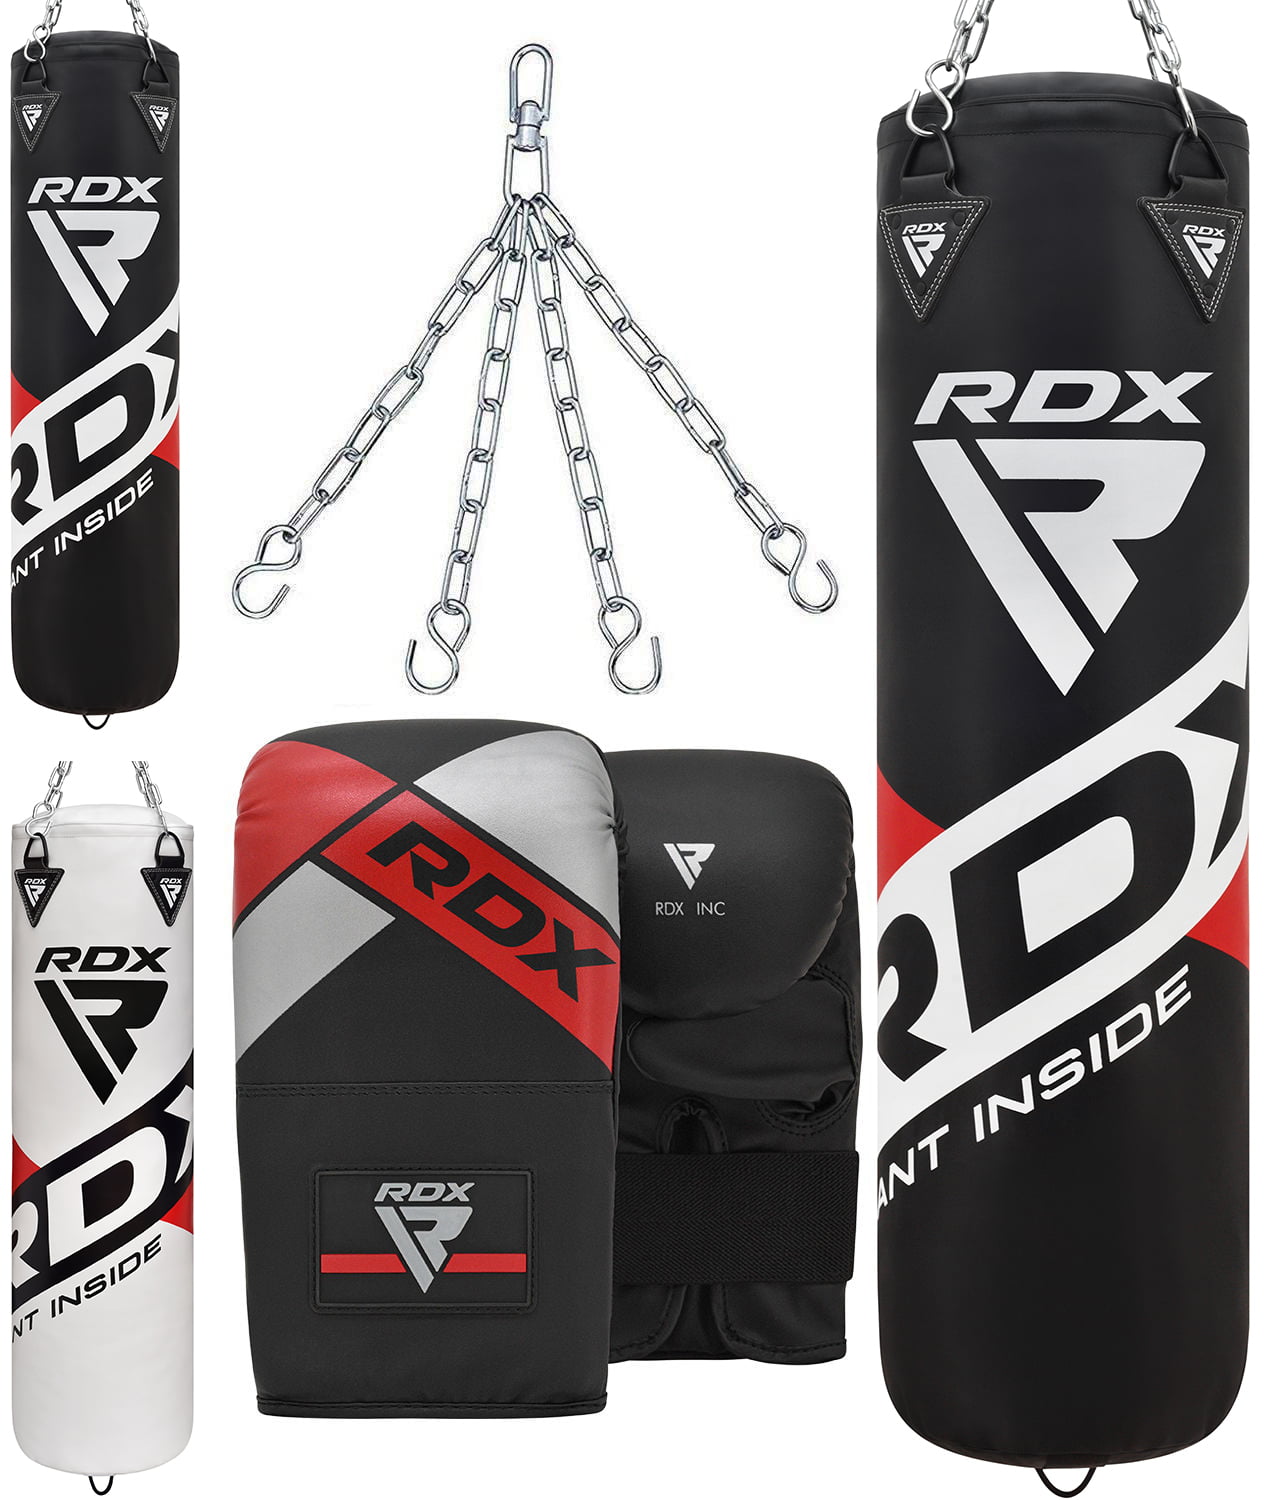 RDX Heavy Duty Punching Bag Boxing Punch Fight Practice Stand Training Kick MMA 